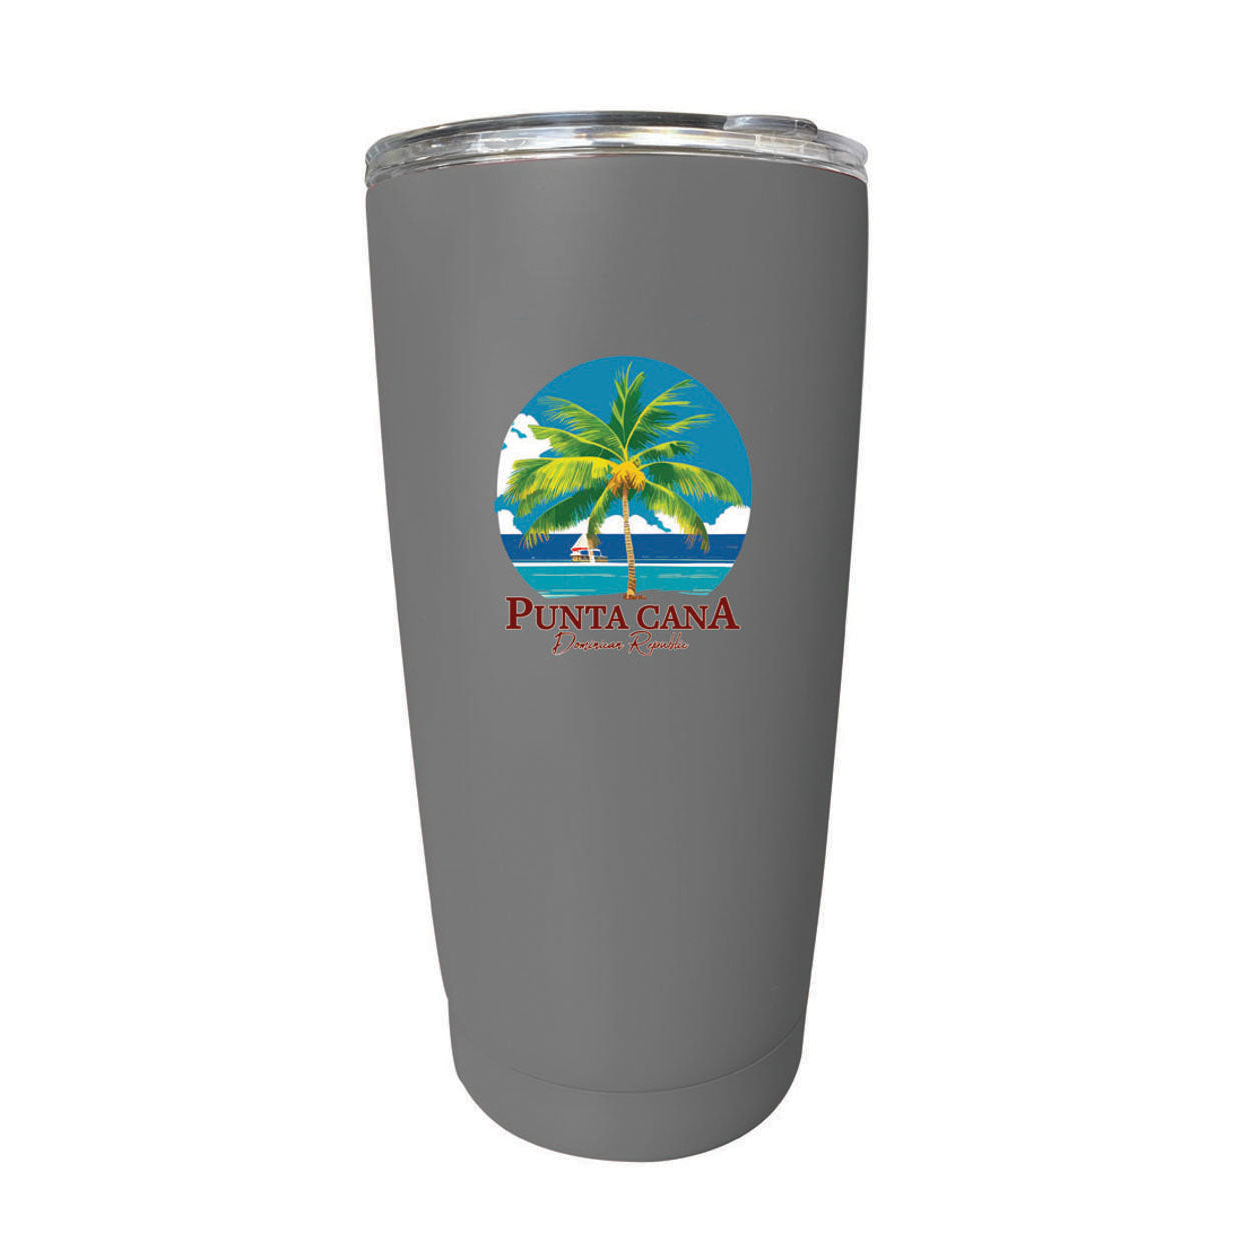 Punta Cana Dominican Republic Souvenir 16 Oz Stainless Steel Insulated Tumbler - Purple, PARROT